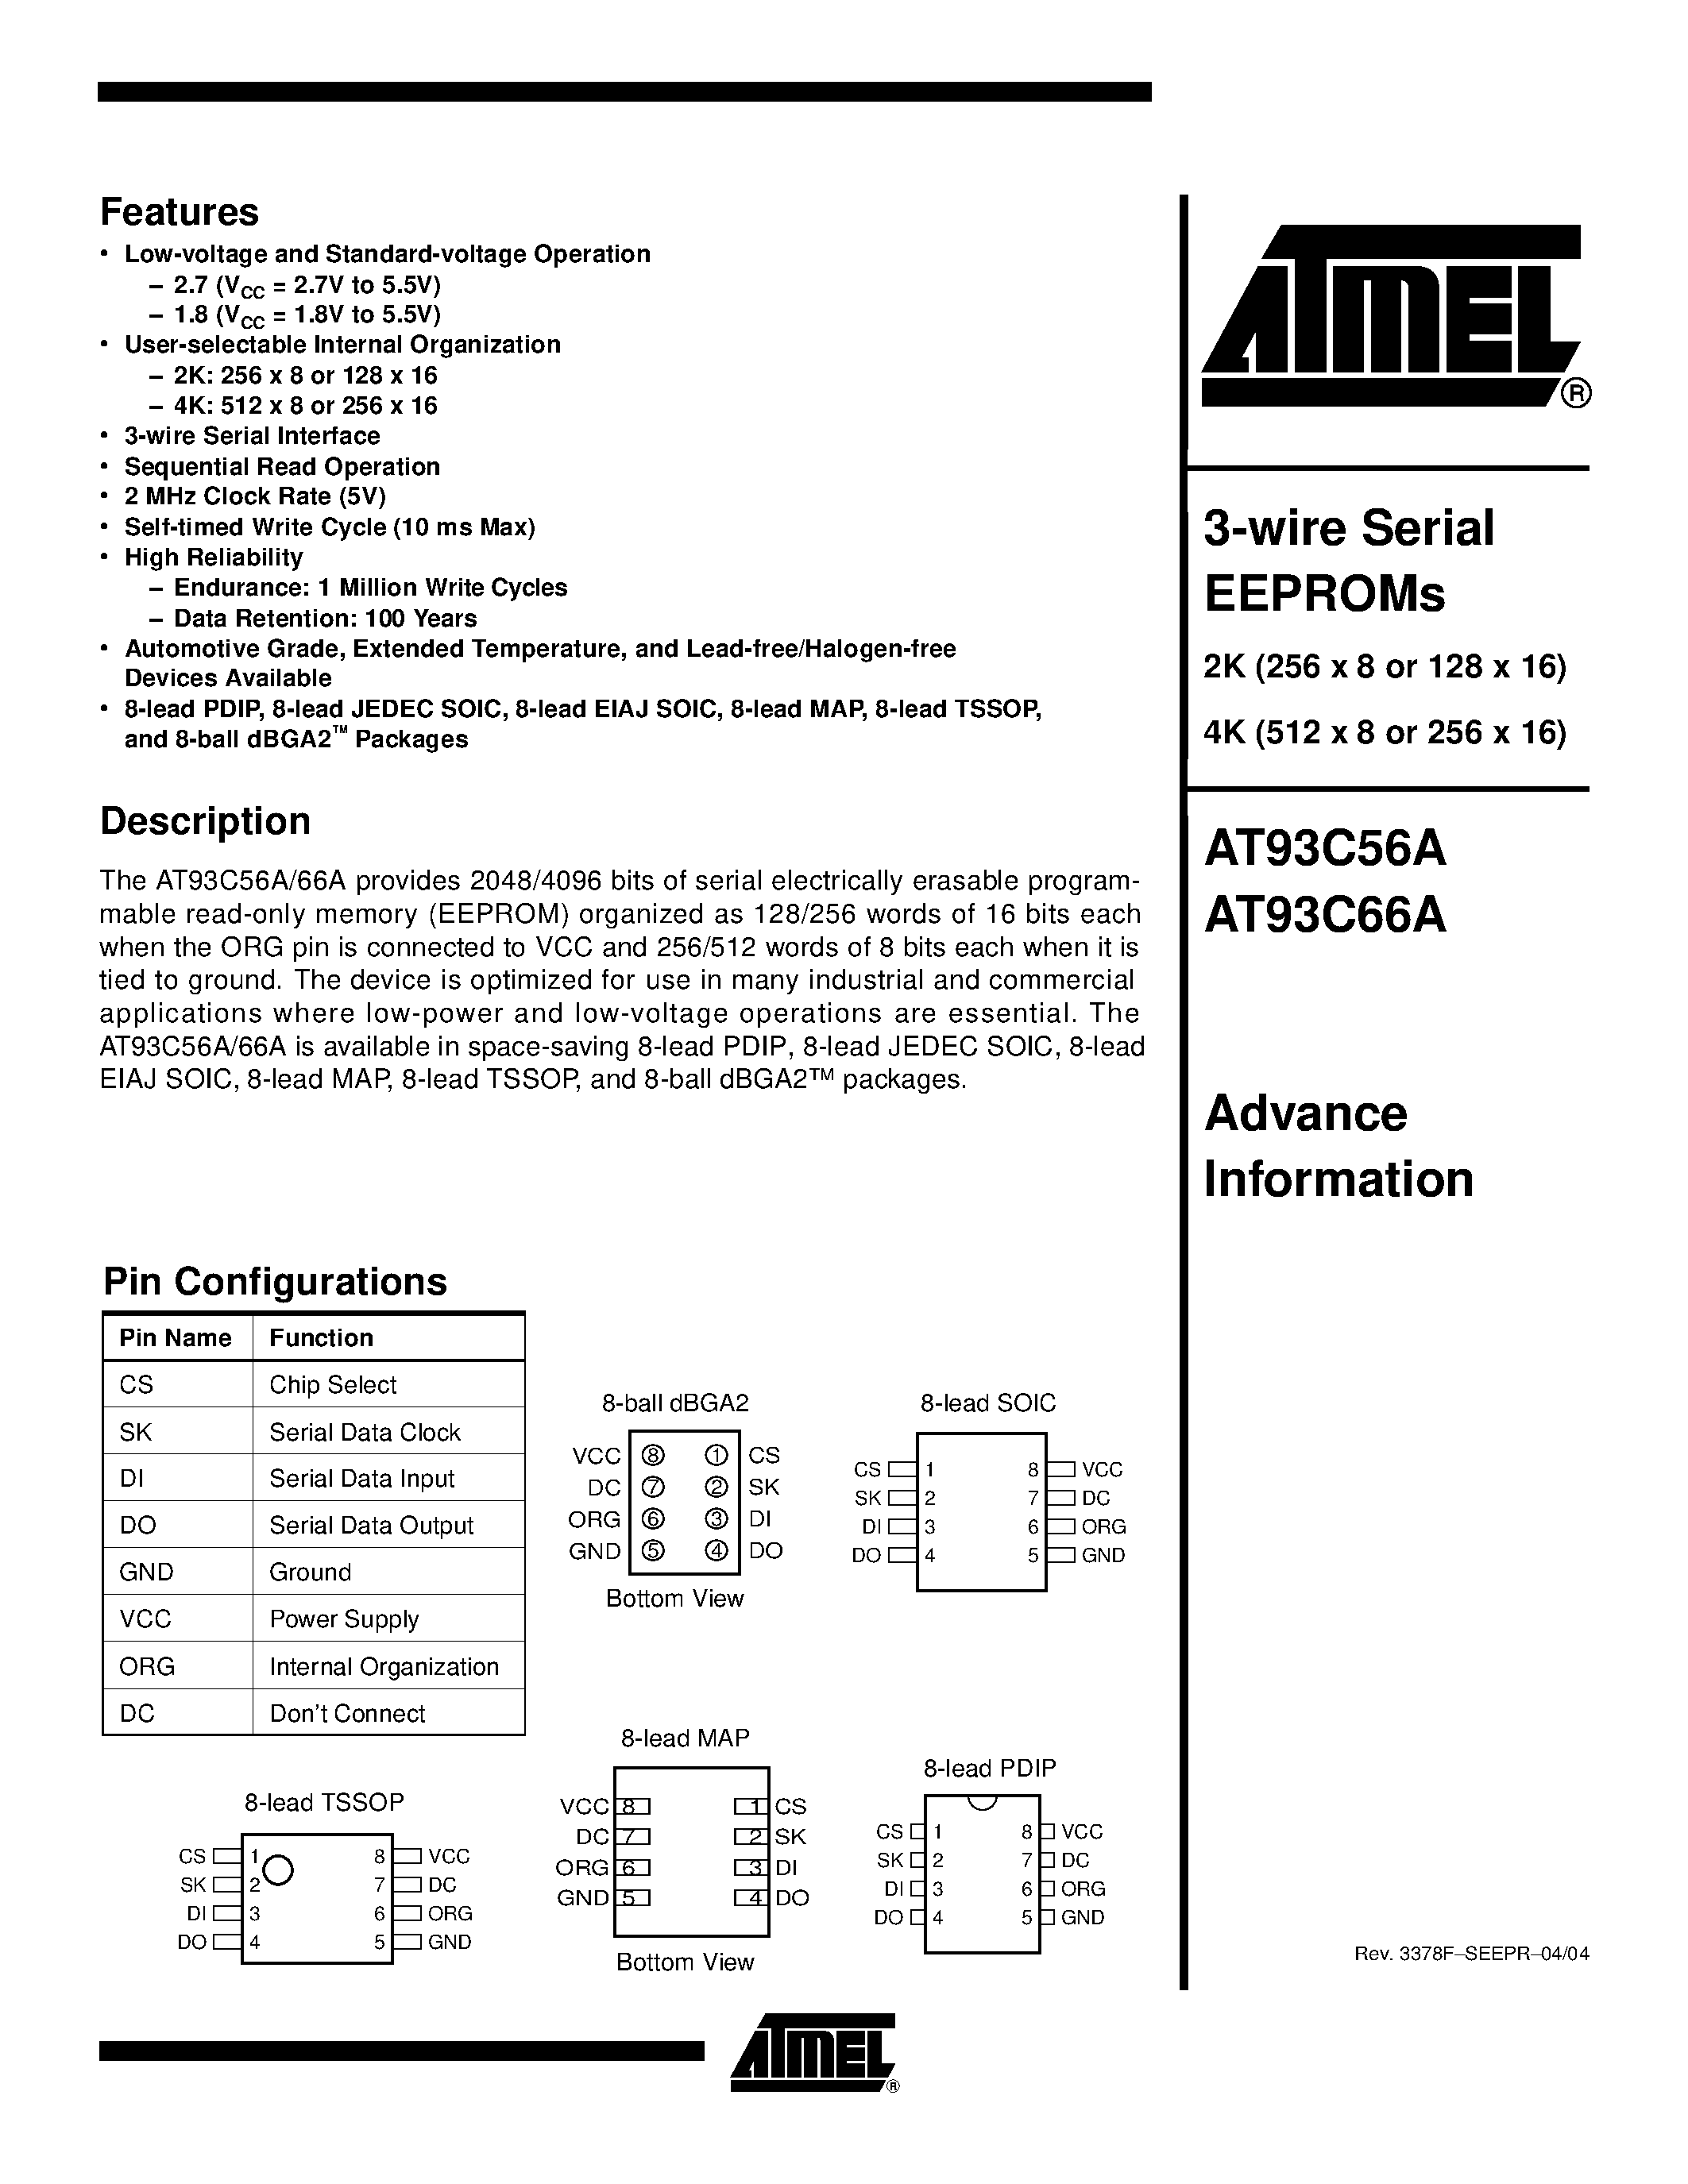 Datasheet AT93C66A-10PI-1.8 - 3-wire Serial EEPROMs 2K (256 x 8 or 128 x 16) page 1